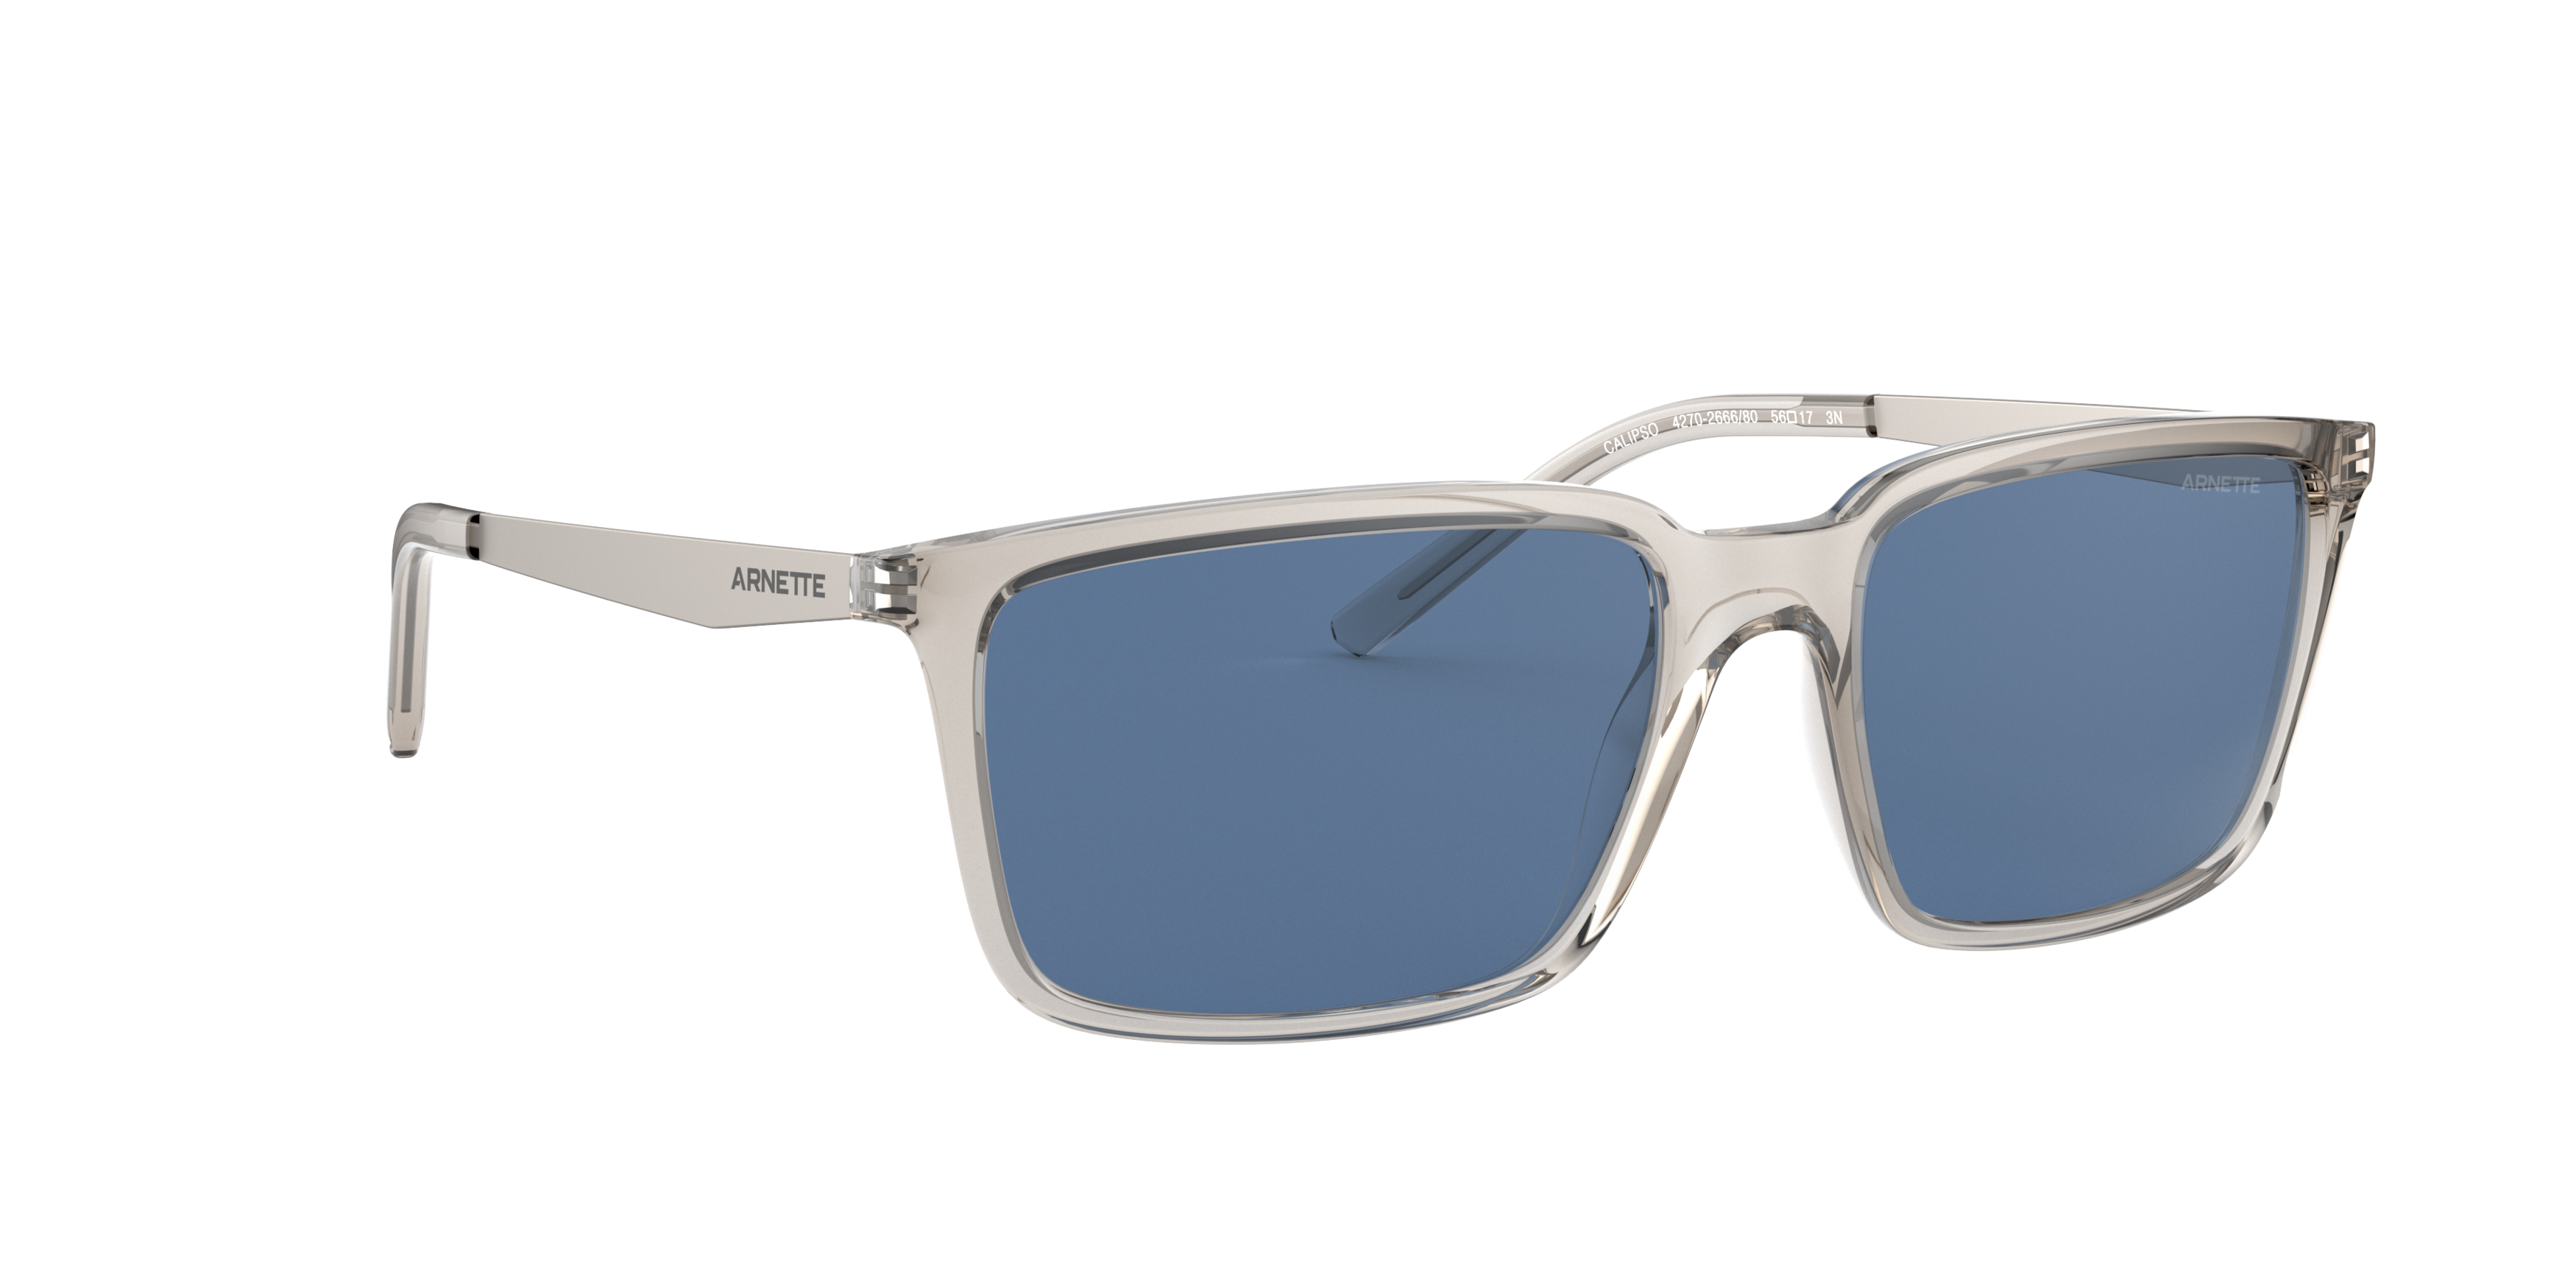 Angle_Right01 Arnette Calipso AN 4270 (266680) Sunglasses Blue / Transparent, Grey